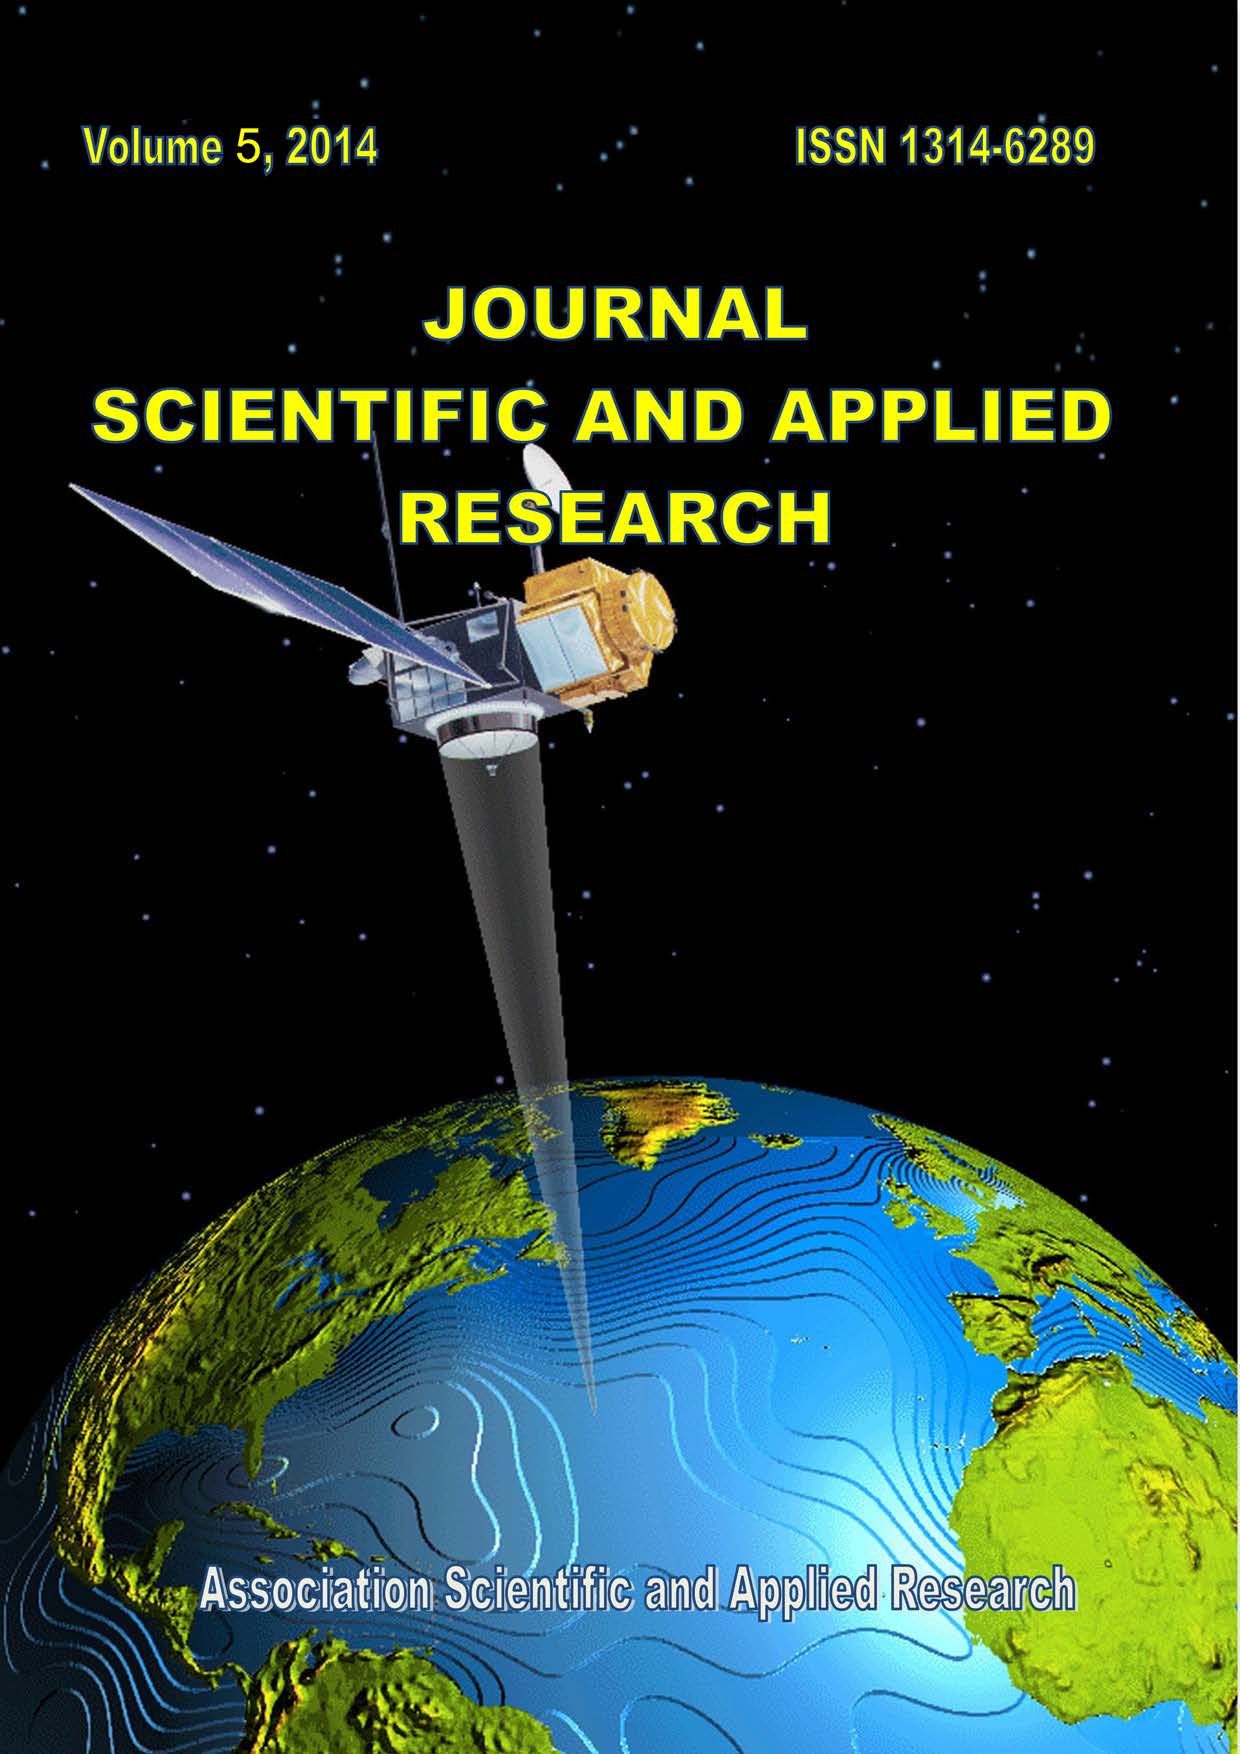 					View Vol. 5 No. 1 (2014):  Journal Scientific and Applied Research
				